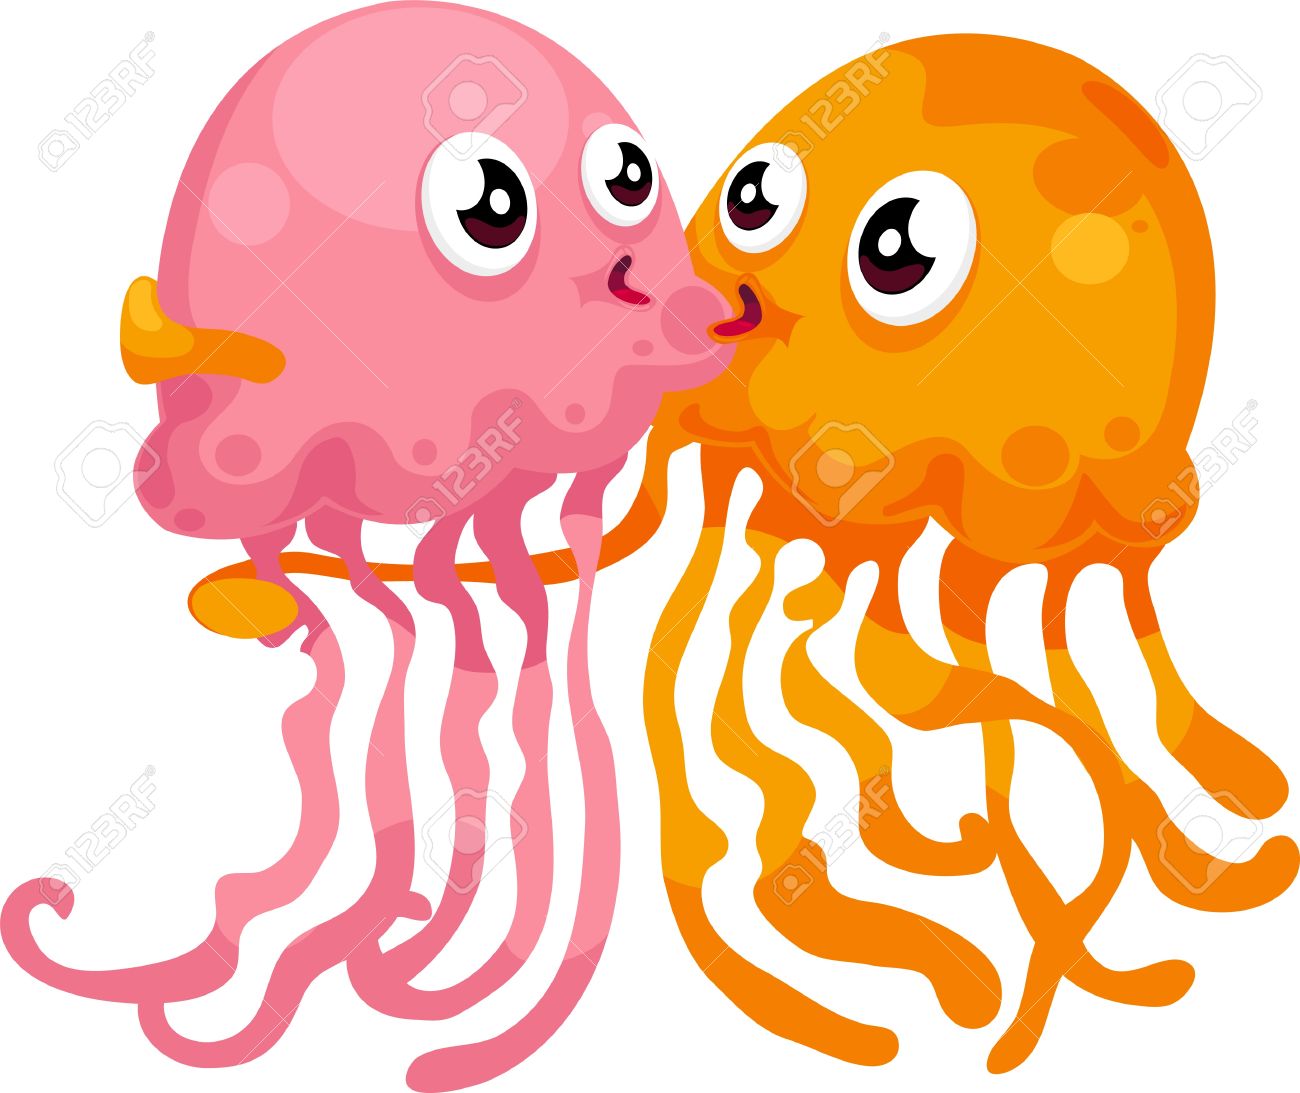 Jellies clipart #6, Download drawings